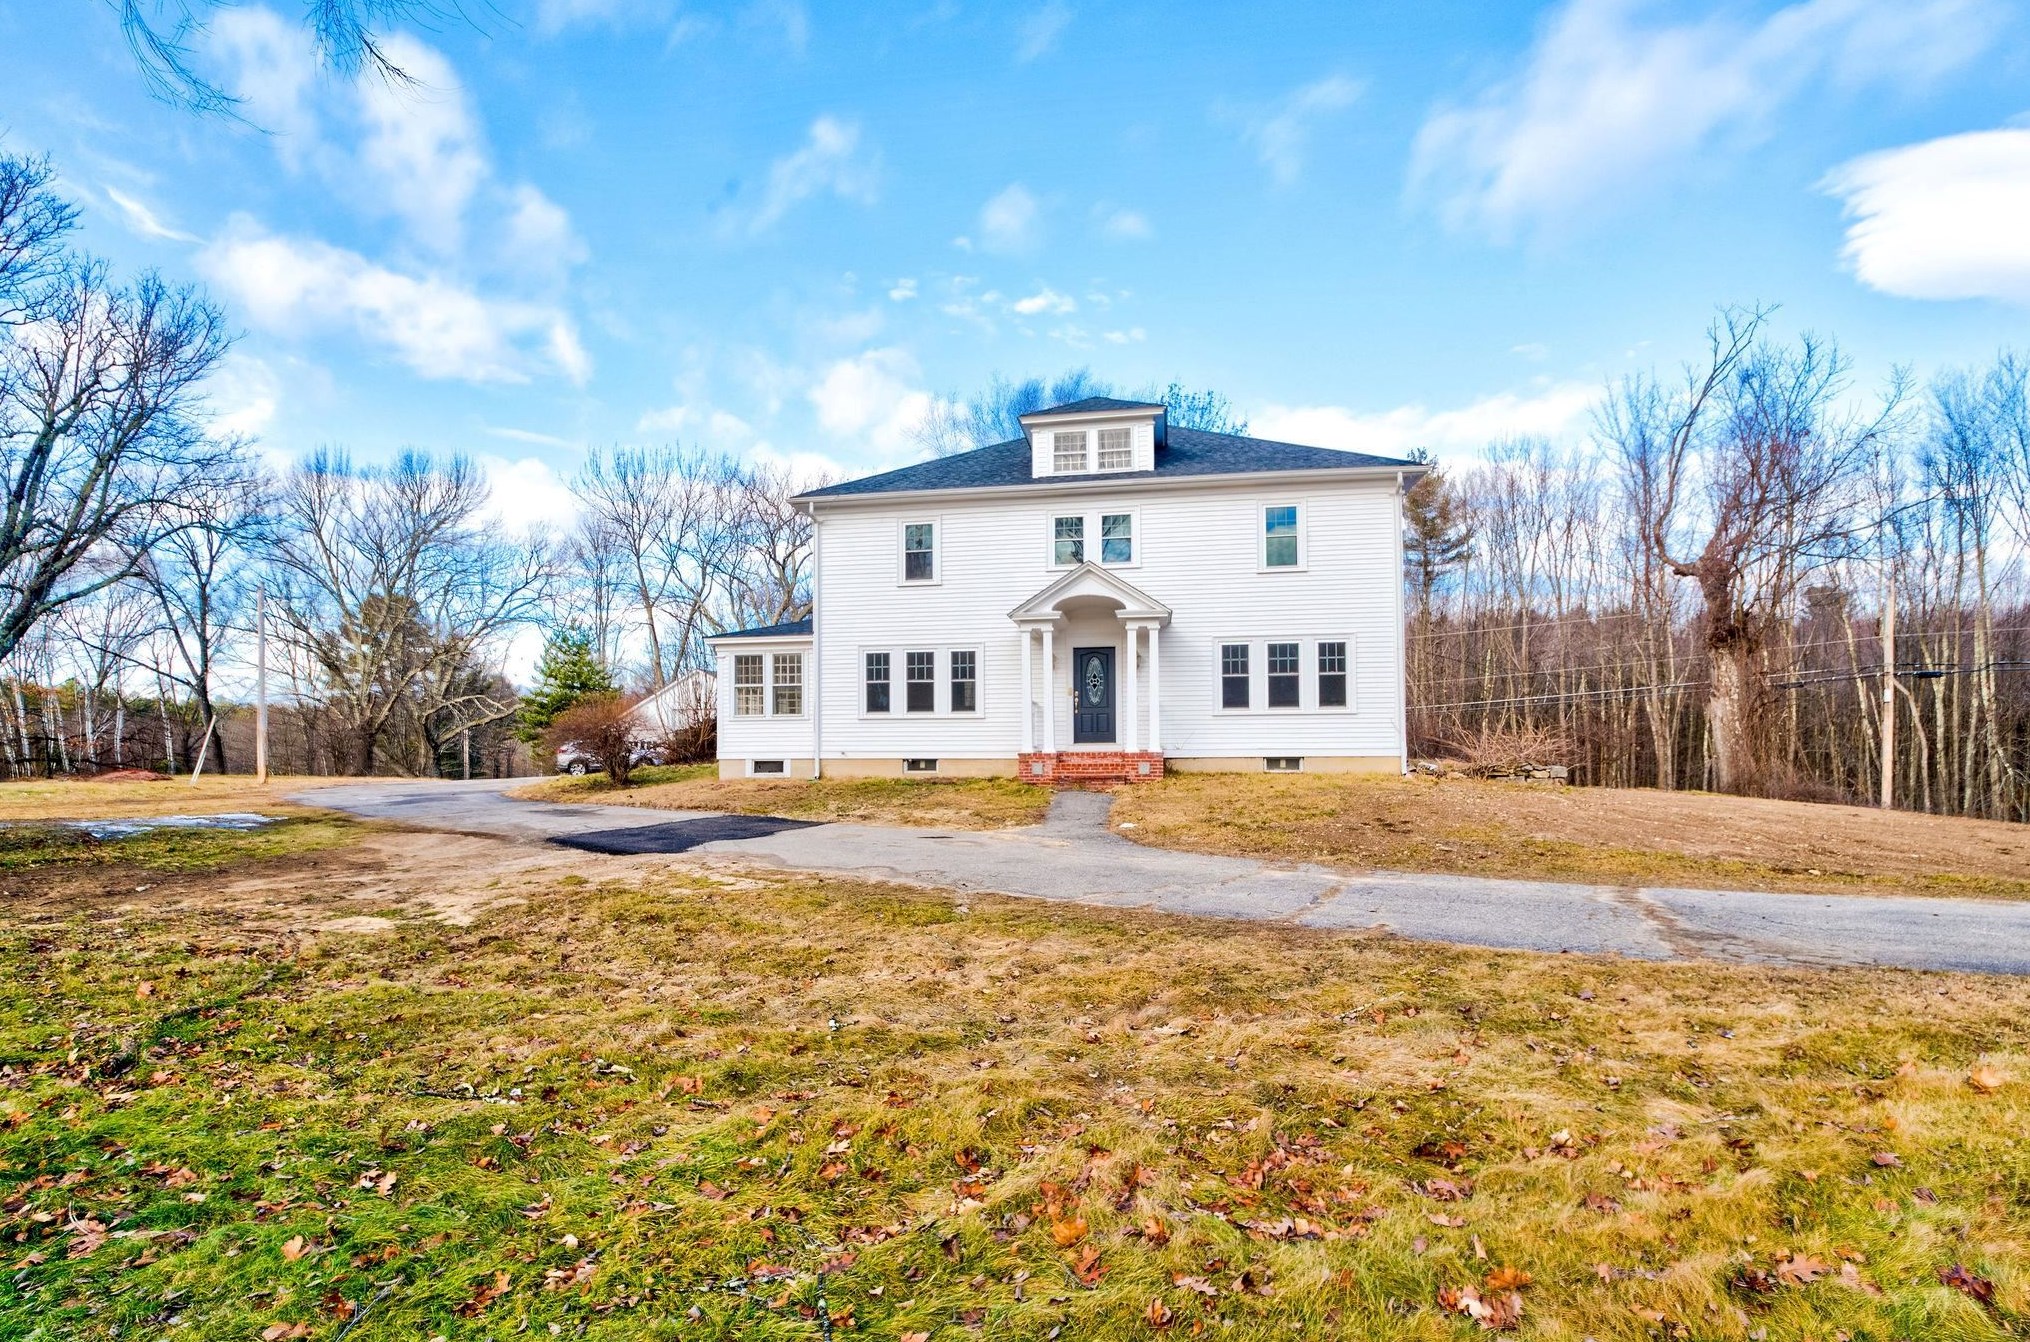 98 Castle Hill Rd, Windham, NH 03087-1774